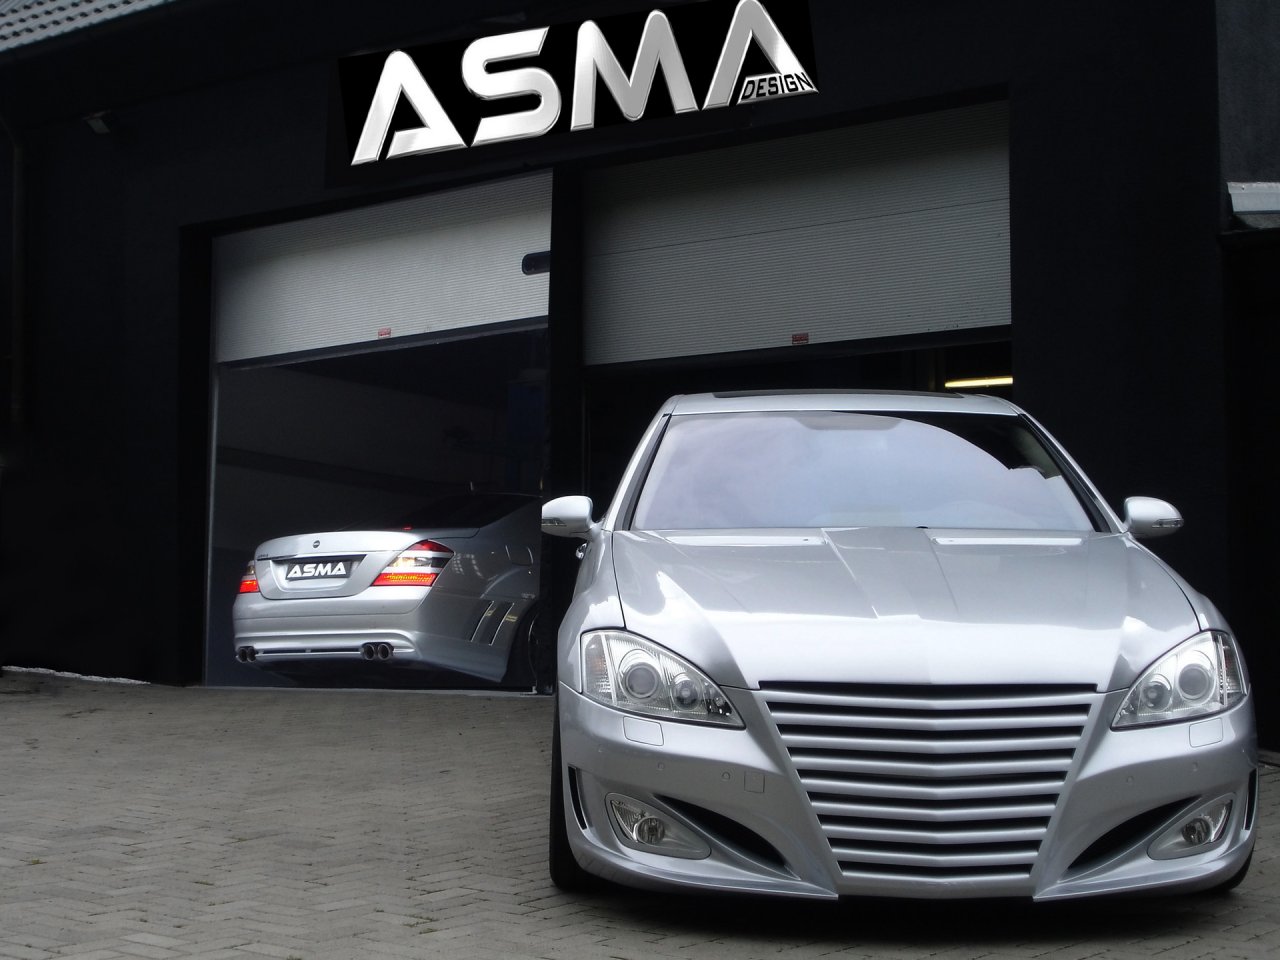 Foto: ASMA Design S Eagle I Widebody based on Mercedes Benz S Class Front Angle And Rear (2007)